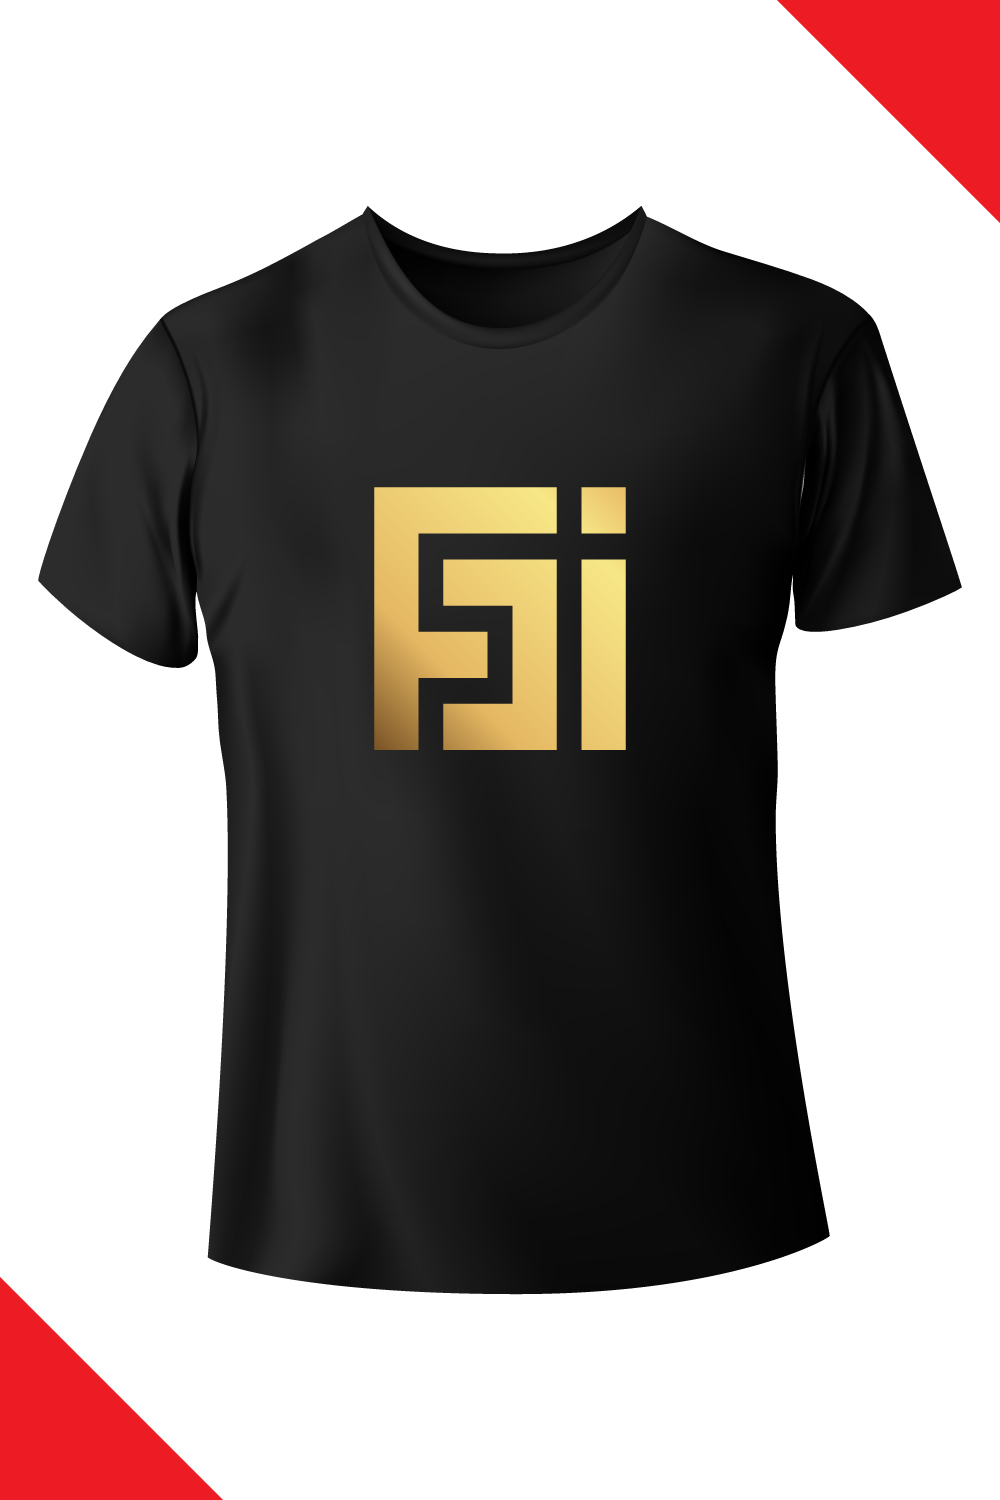 FJI LOGO AND T-SHIRT pinterest preview image.